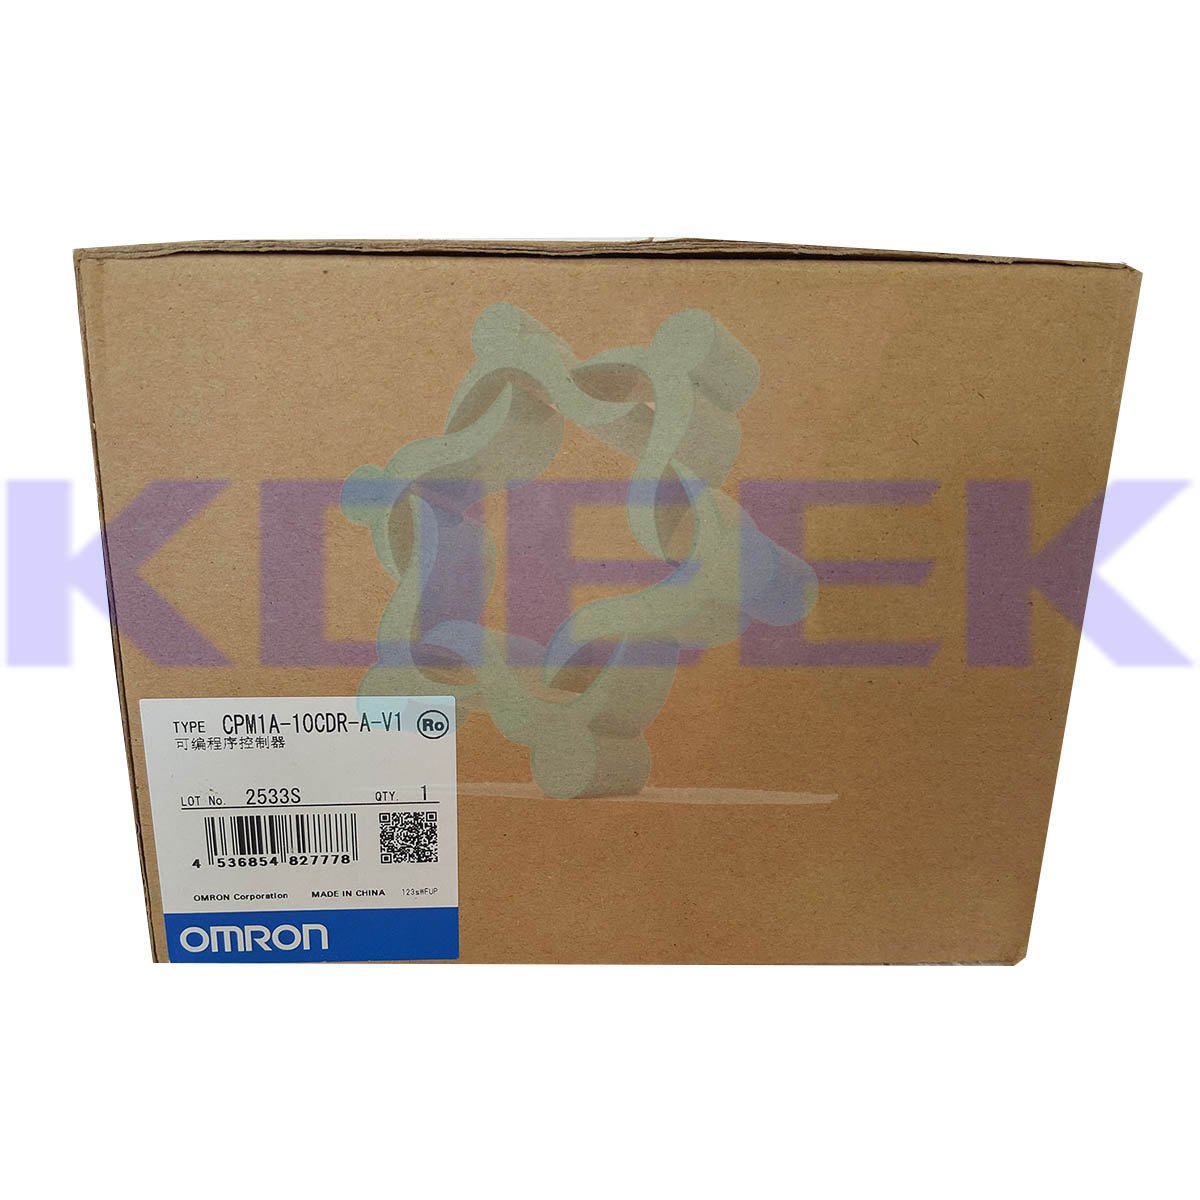 CPM1A-10CDR-A-V1 KOEED 101-200, 80%, import_2020_10_10_031751, Omron, Other